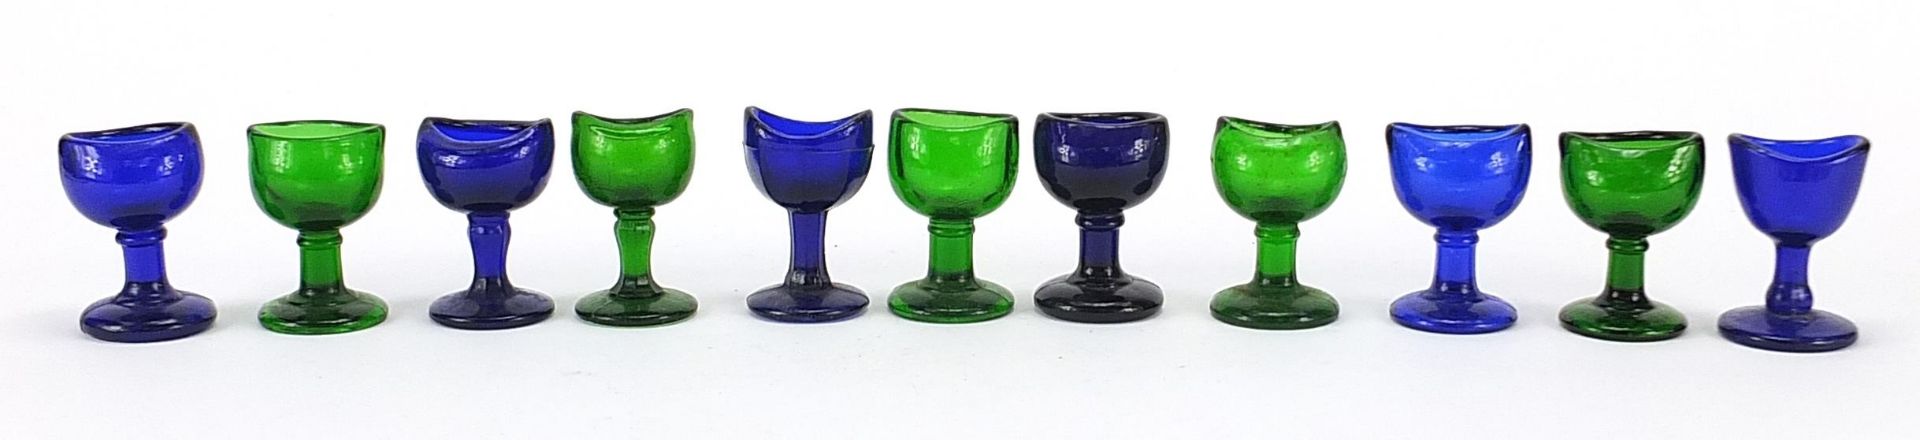 Eleven antique glass eye baths including six Bristol blue examples, each approximately 7.5cm high